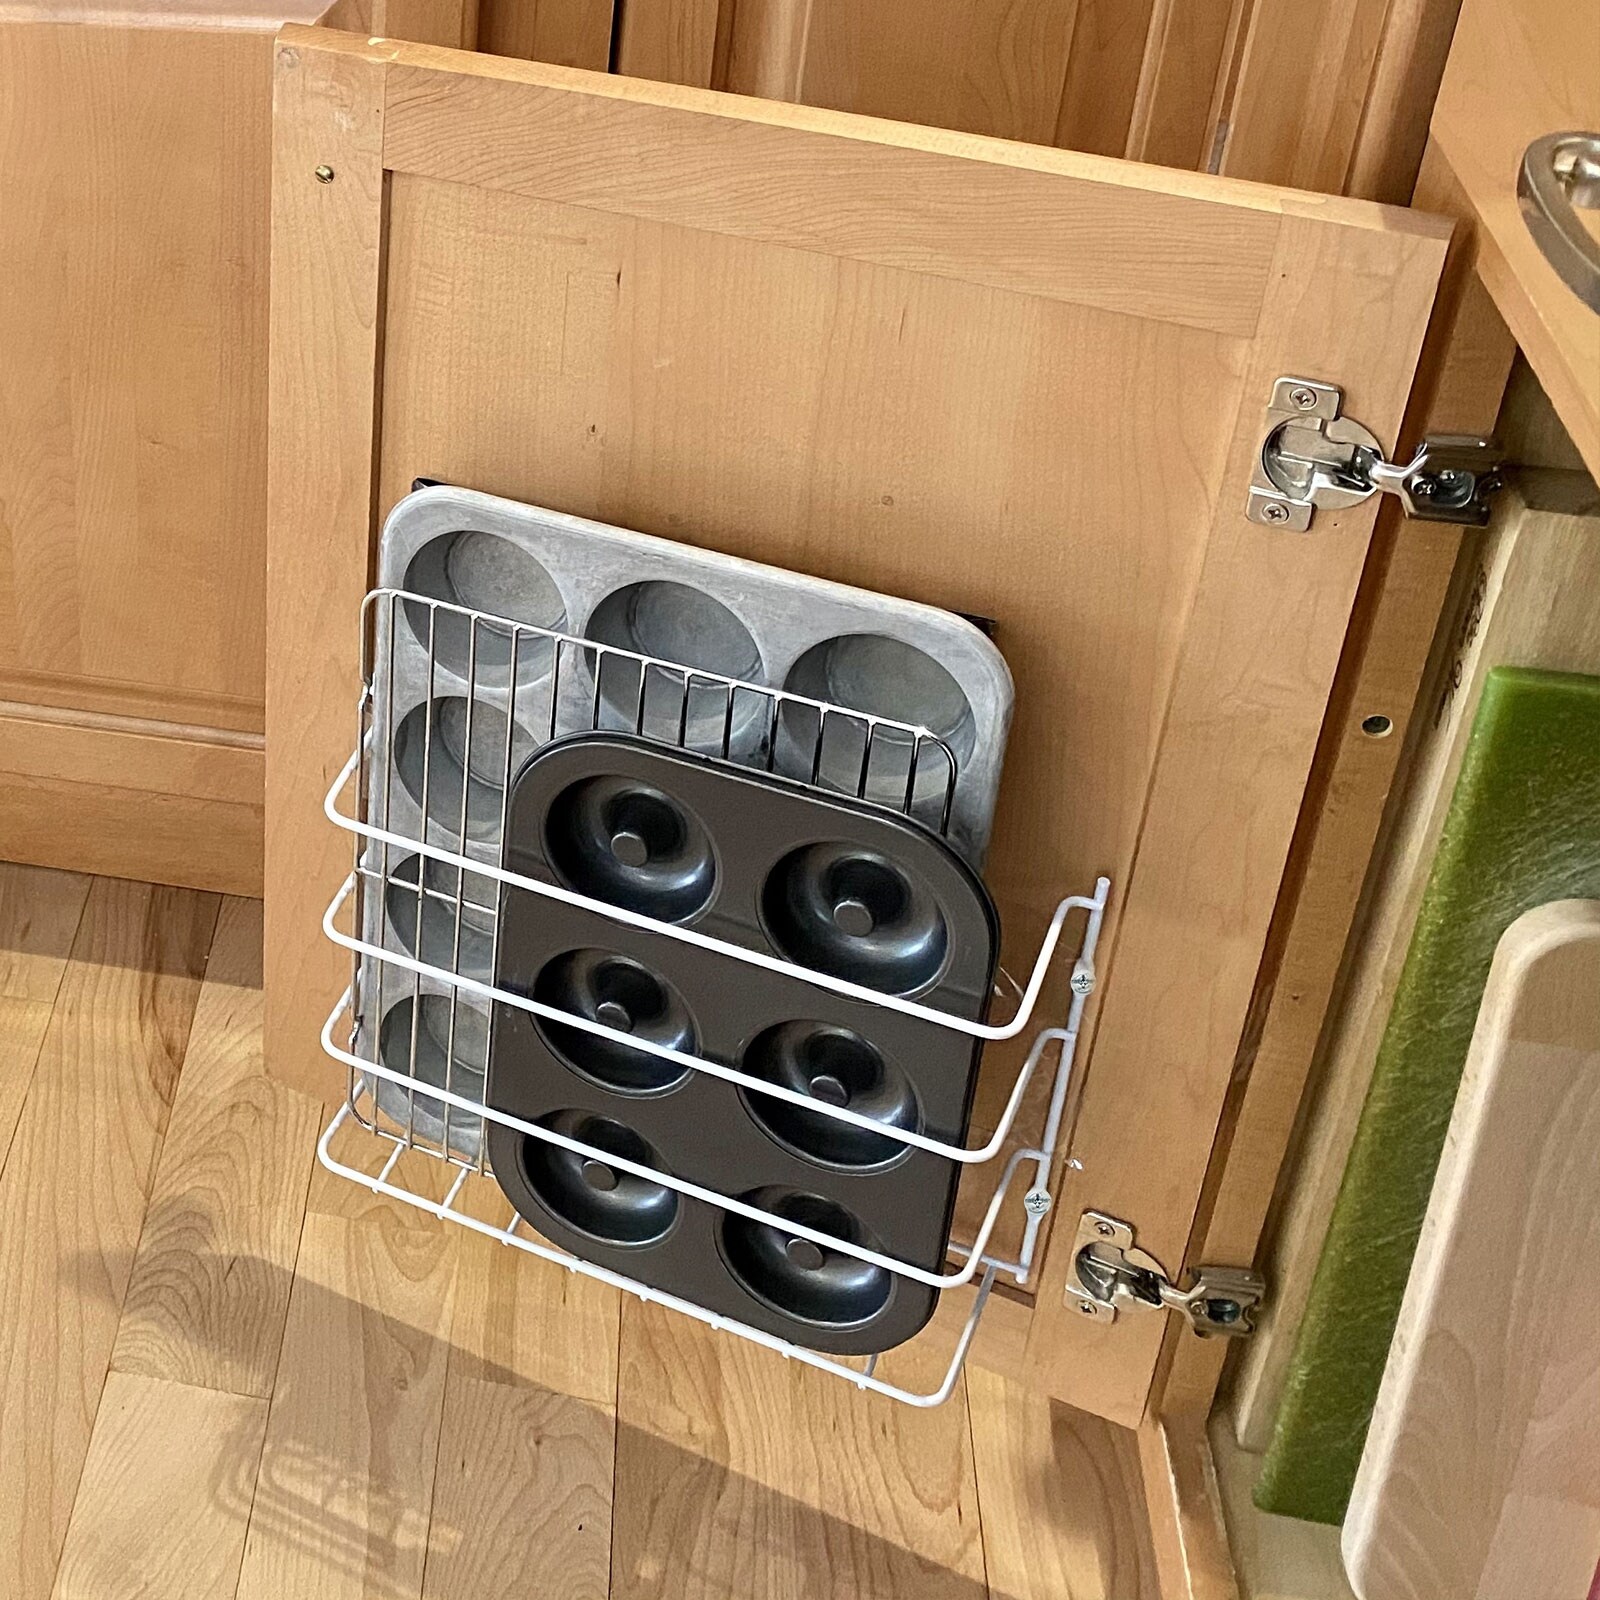 https://ak1.ostkcdn.com/images/products/is/images/direct/55847085612393128727a9b97f68e59e632524bd/Evelots-Cutting-Board-Wrap-Storage-Rack-Wall-Door-Mount--Foil-Wax-Paper-Metal.jpg